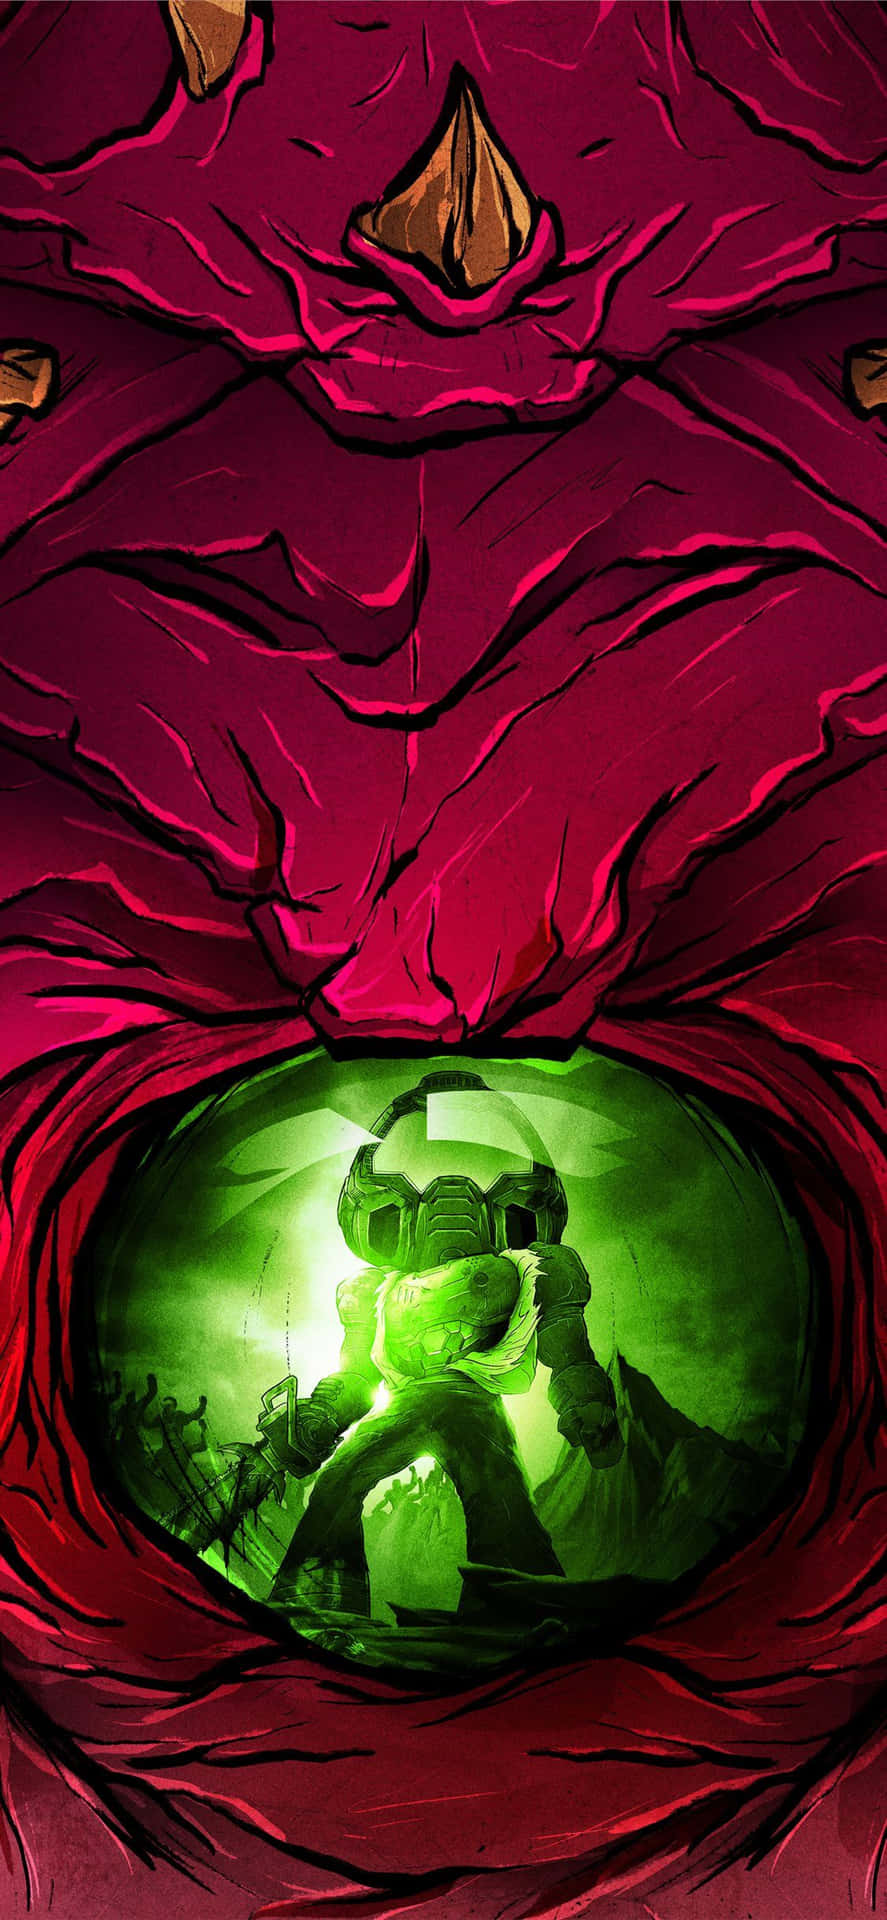 Unlock the power of the "Doom Eternal" experience from your iPhone Wallpaper